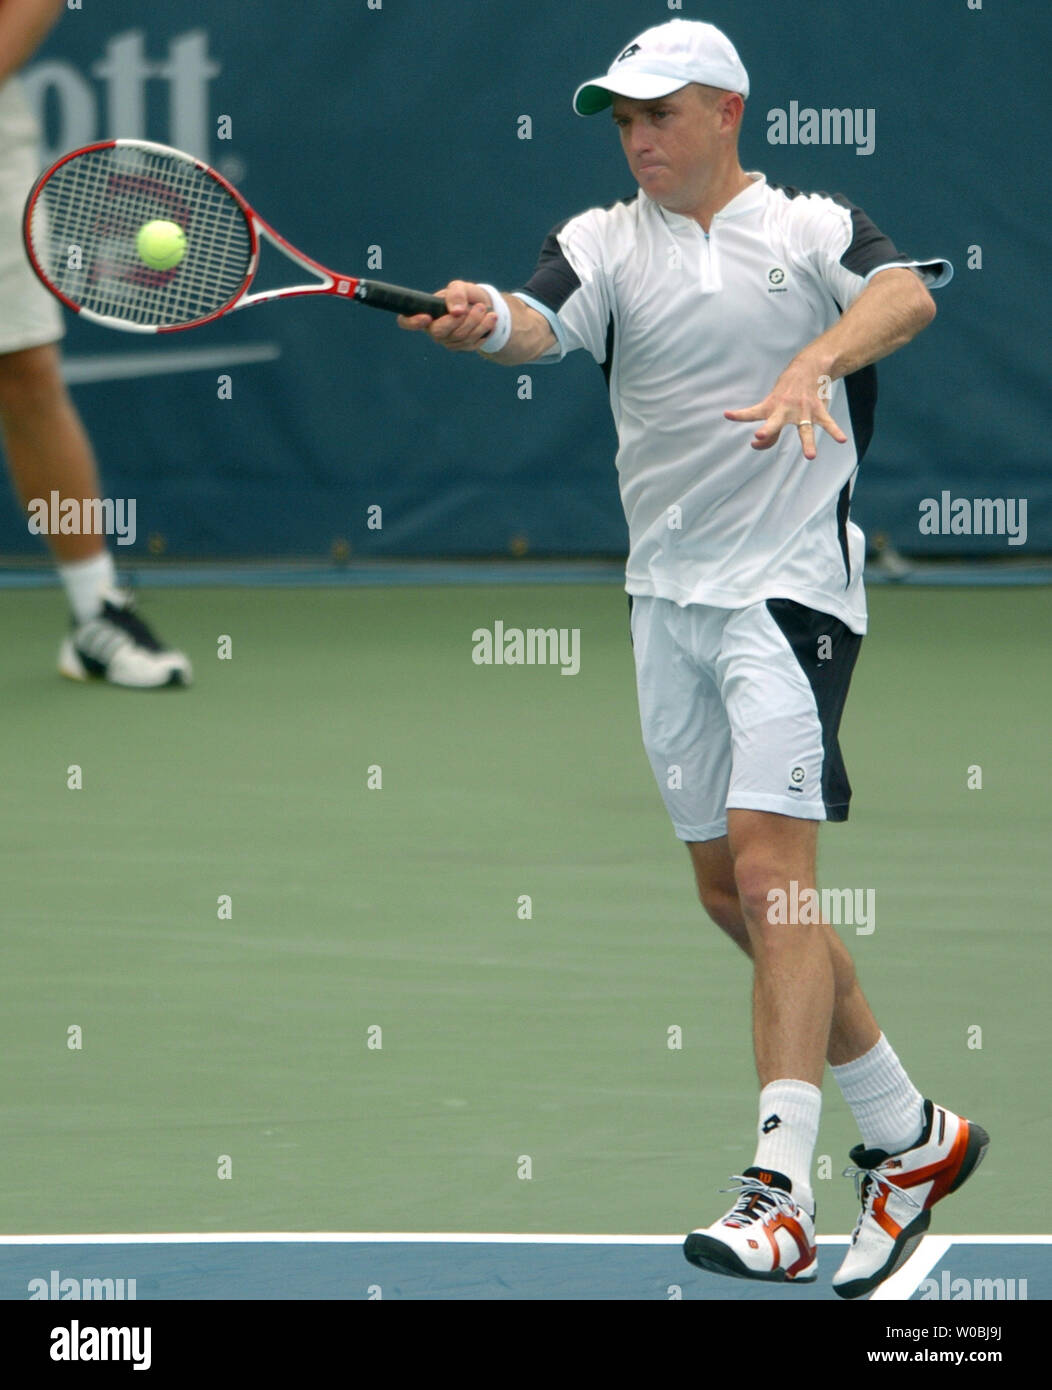 Kevin Ullyett returns a serve in the second set against Mike and Bob Bryan  during the mens doubles final of the Legg Mason Tennis Classic at the  William H.G. Fitzgerald Tennis Center